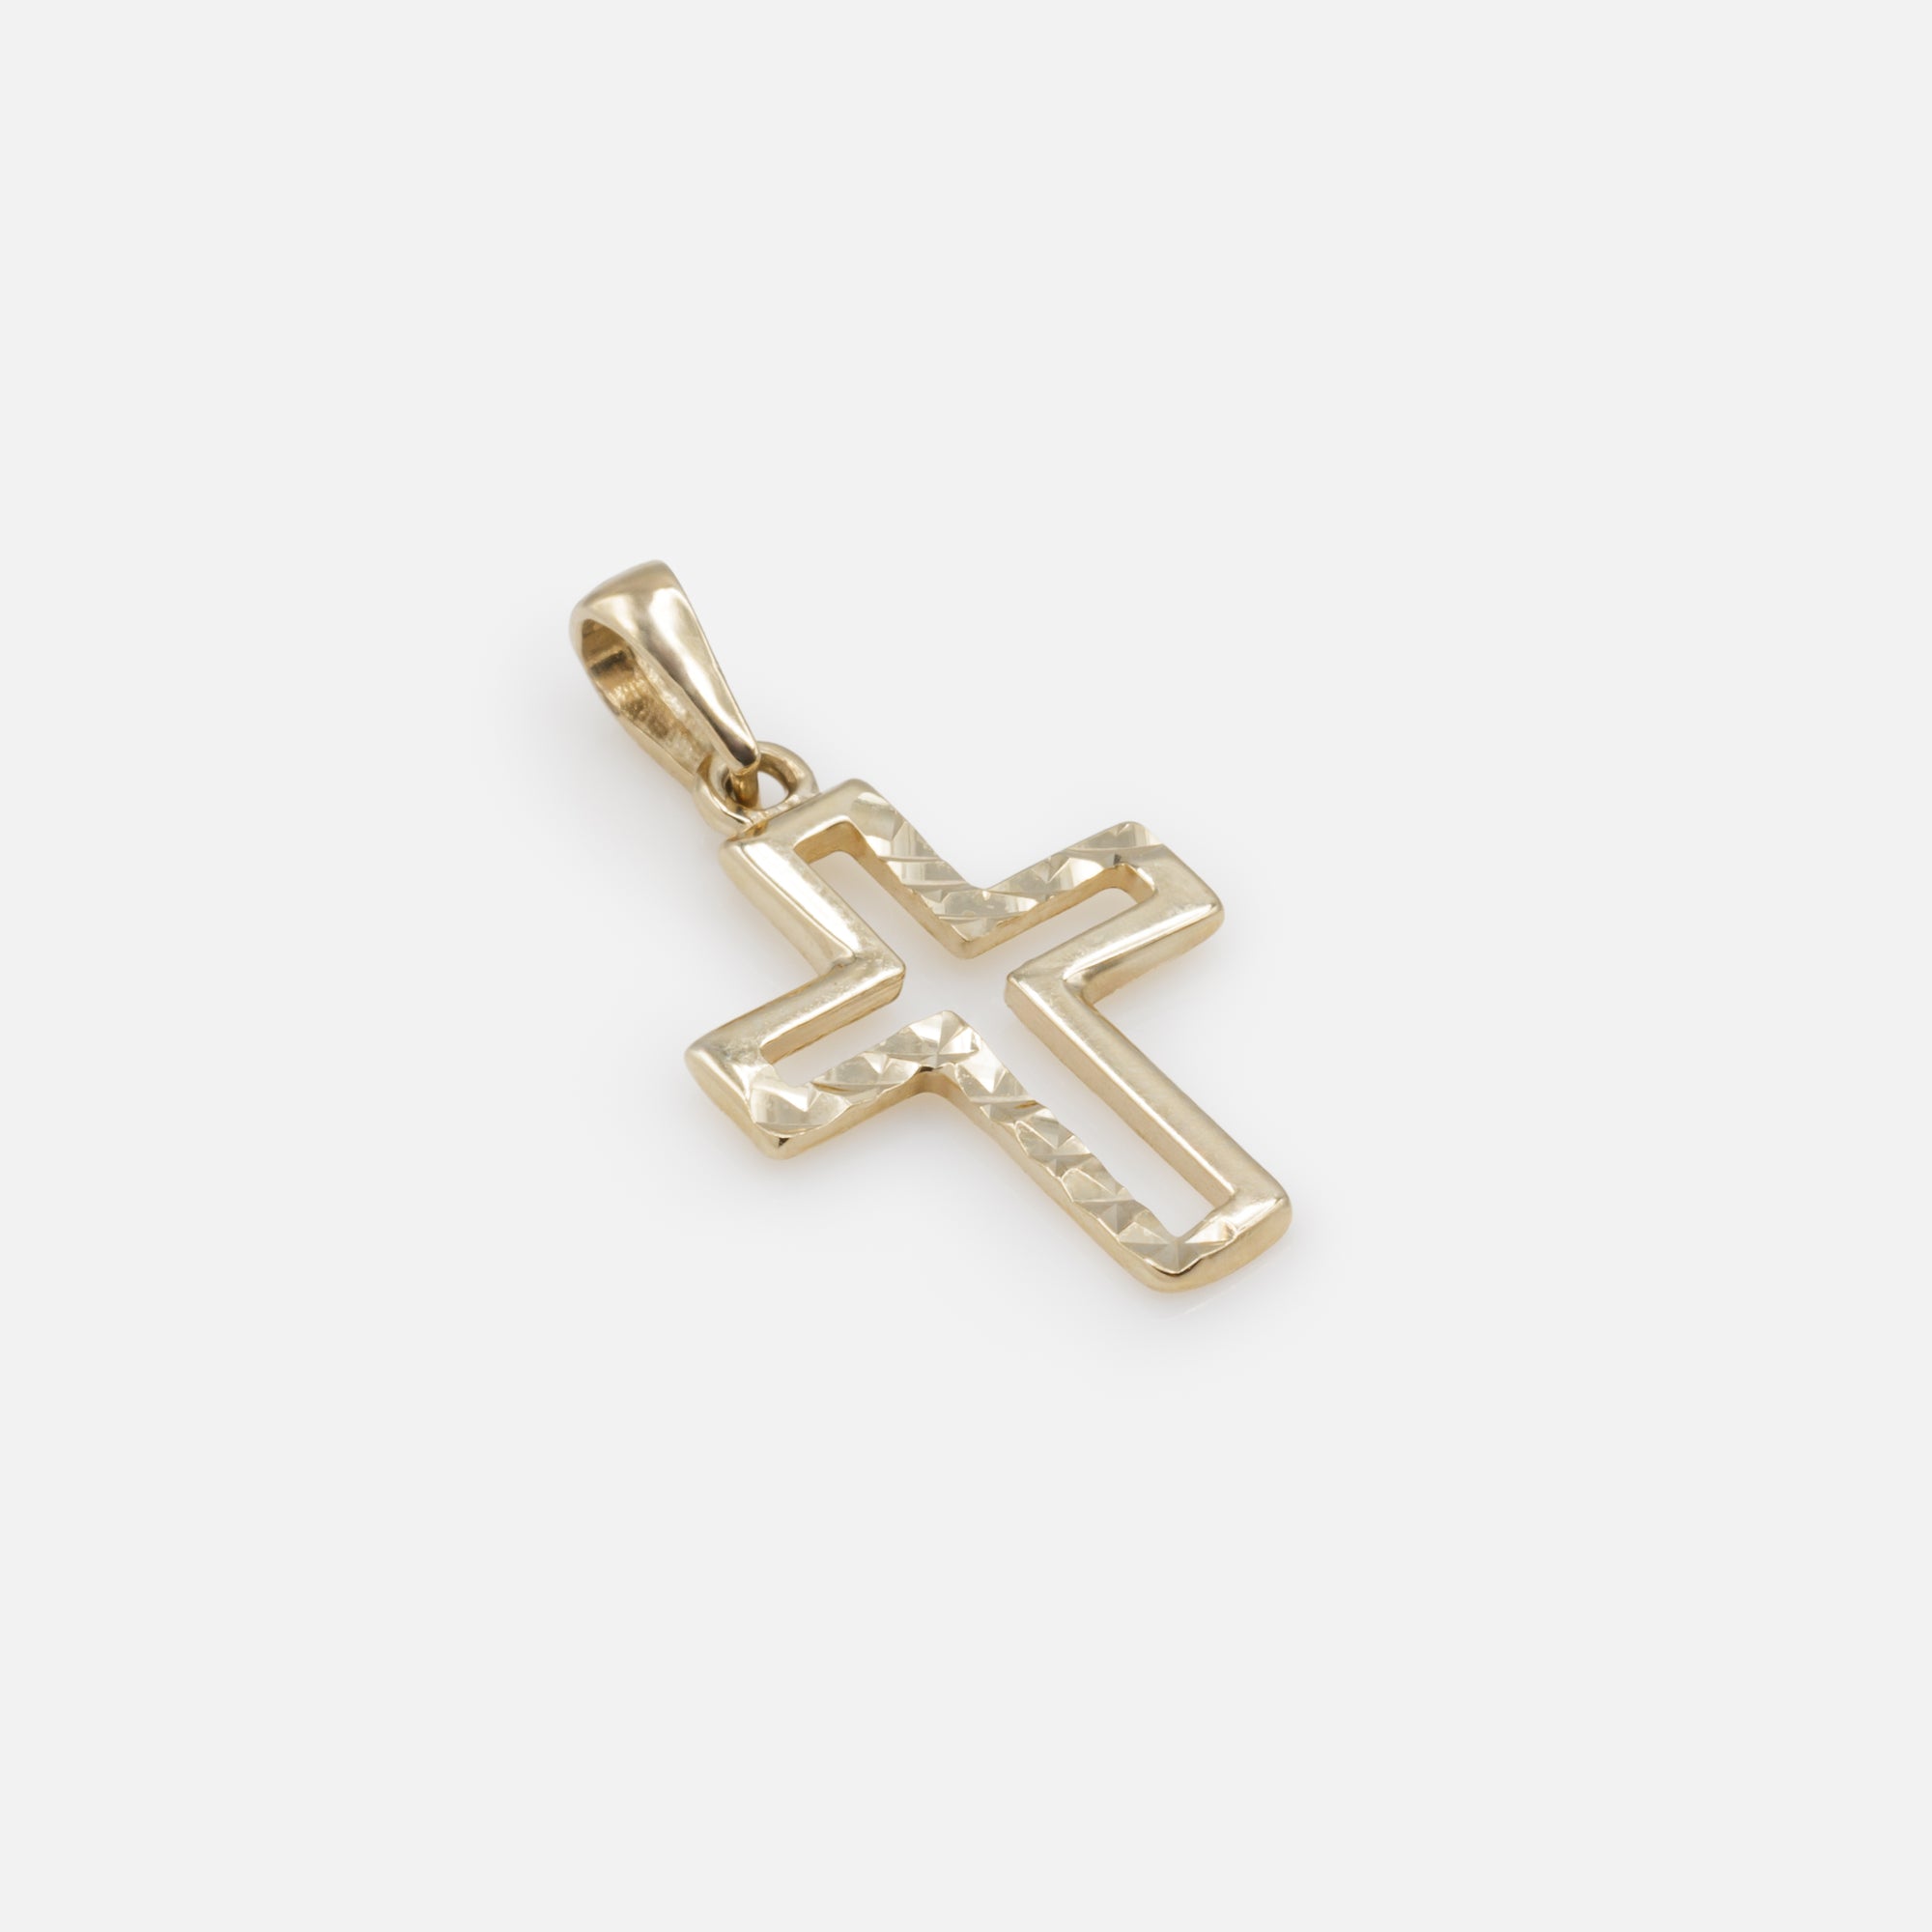 Textured Cross Charm in 10k Gold